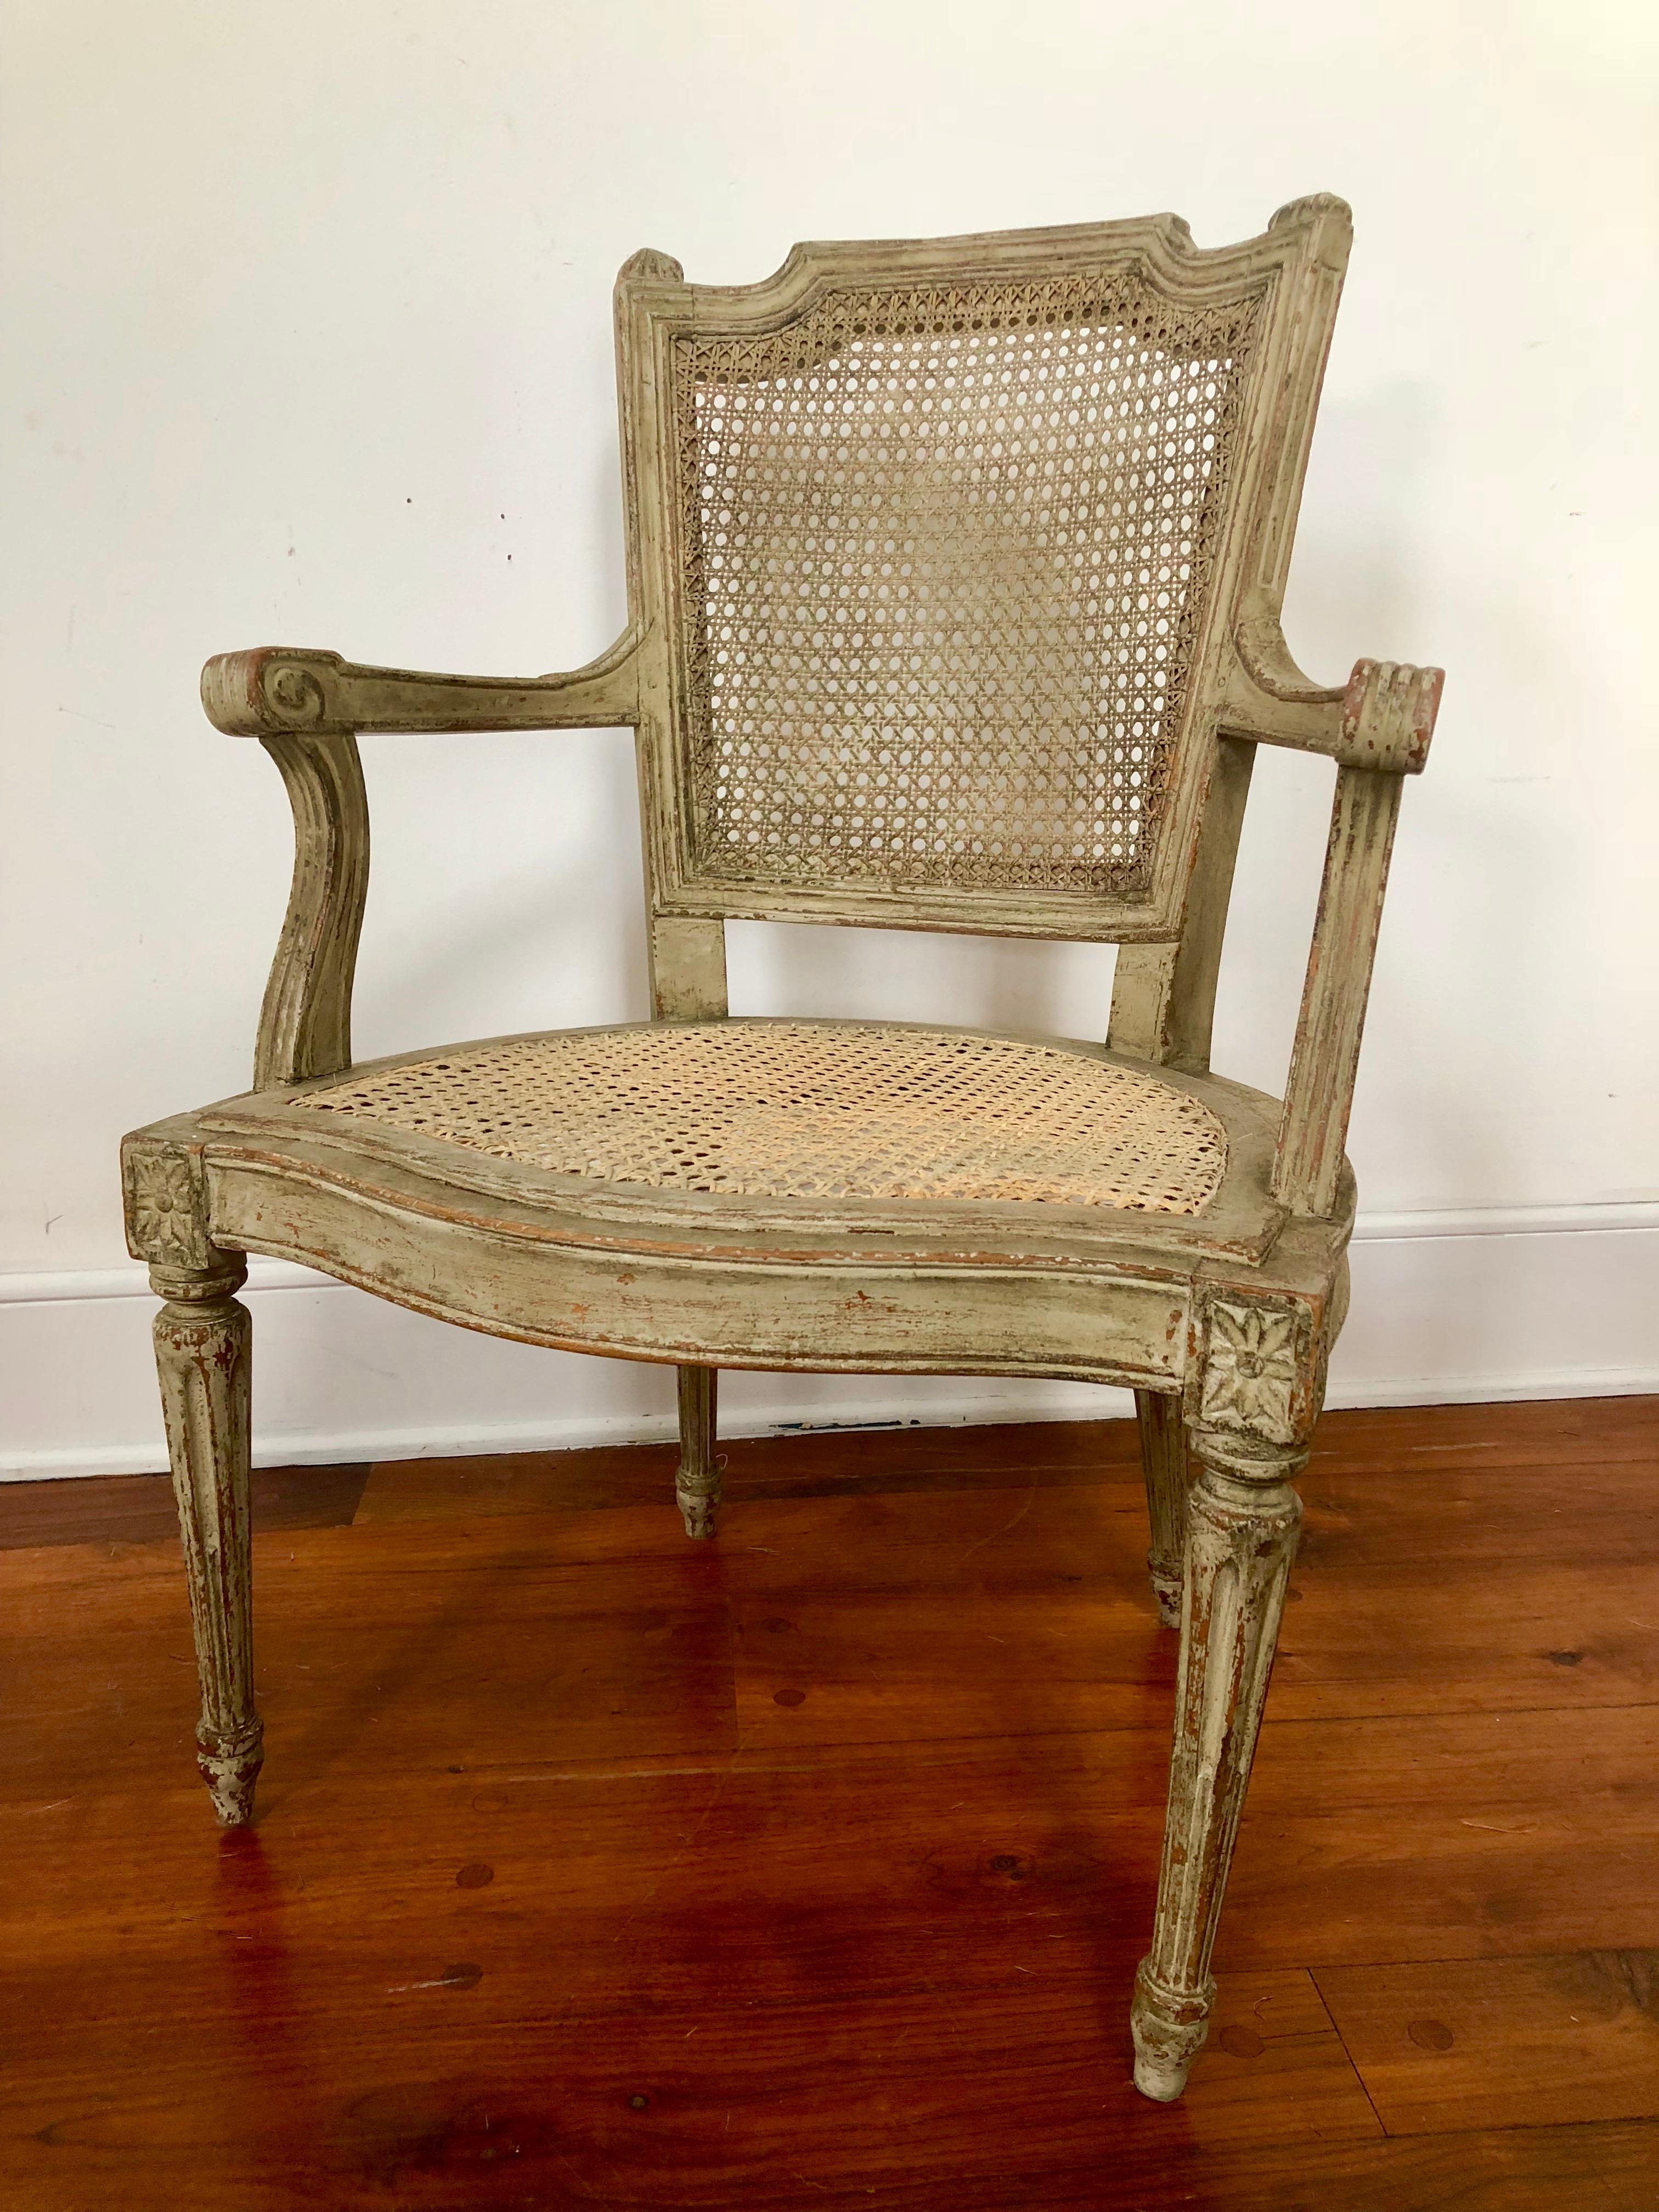 A French Louis XVI Style “fauteuil de bureau” in grey/ green painted finish with caned seat and back, early 20th century.